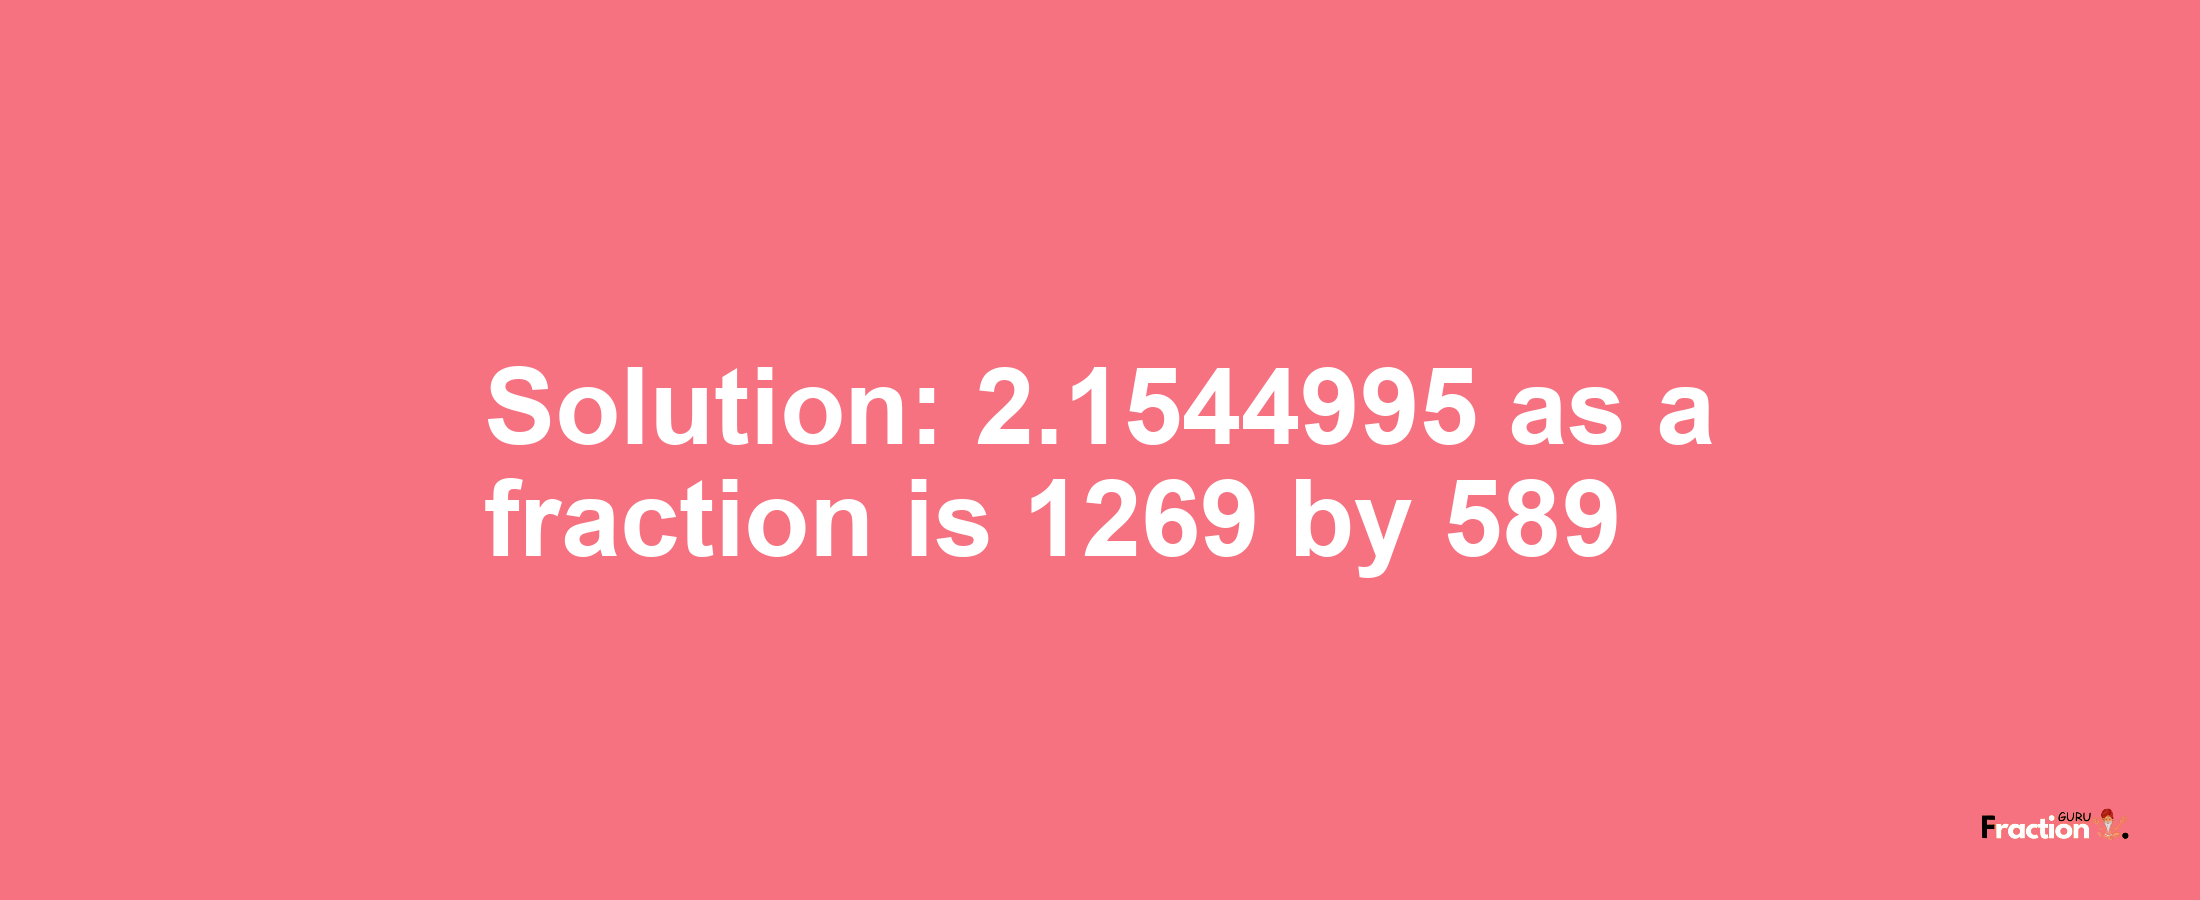 Solution:2.1544995 as a fraction is 1269/589